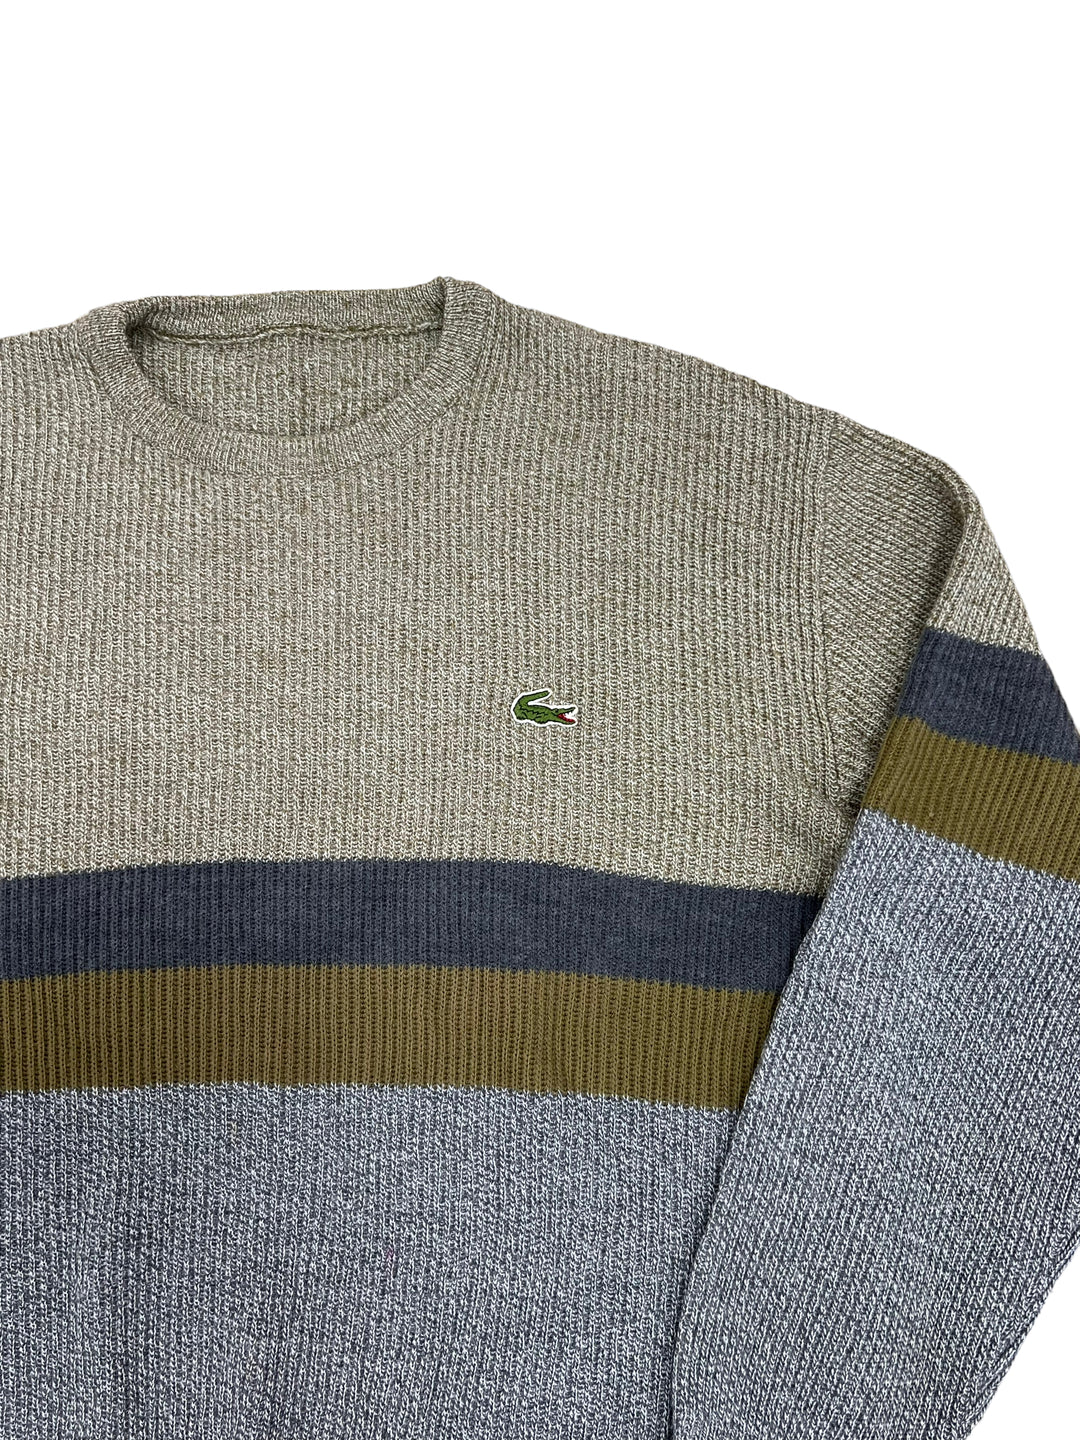 Lacoste Vintage Sweater Men’s Extra Large